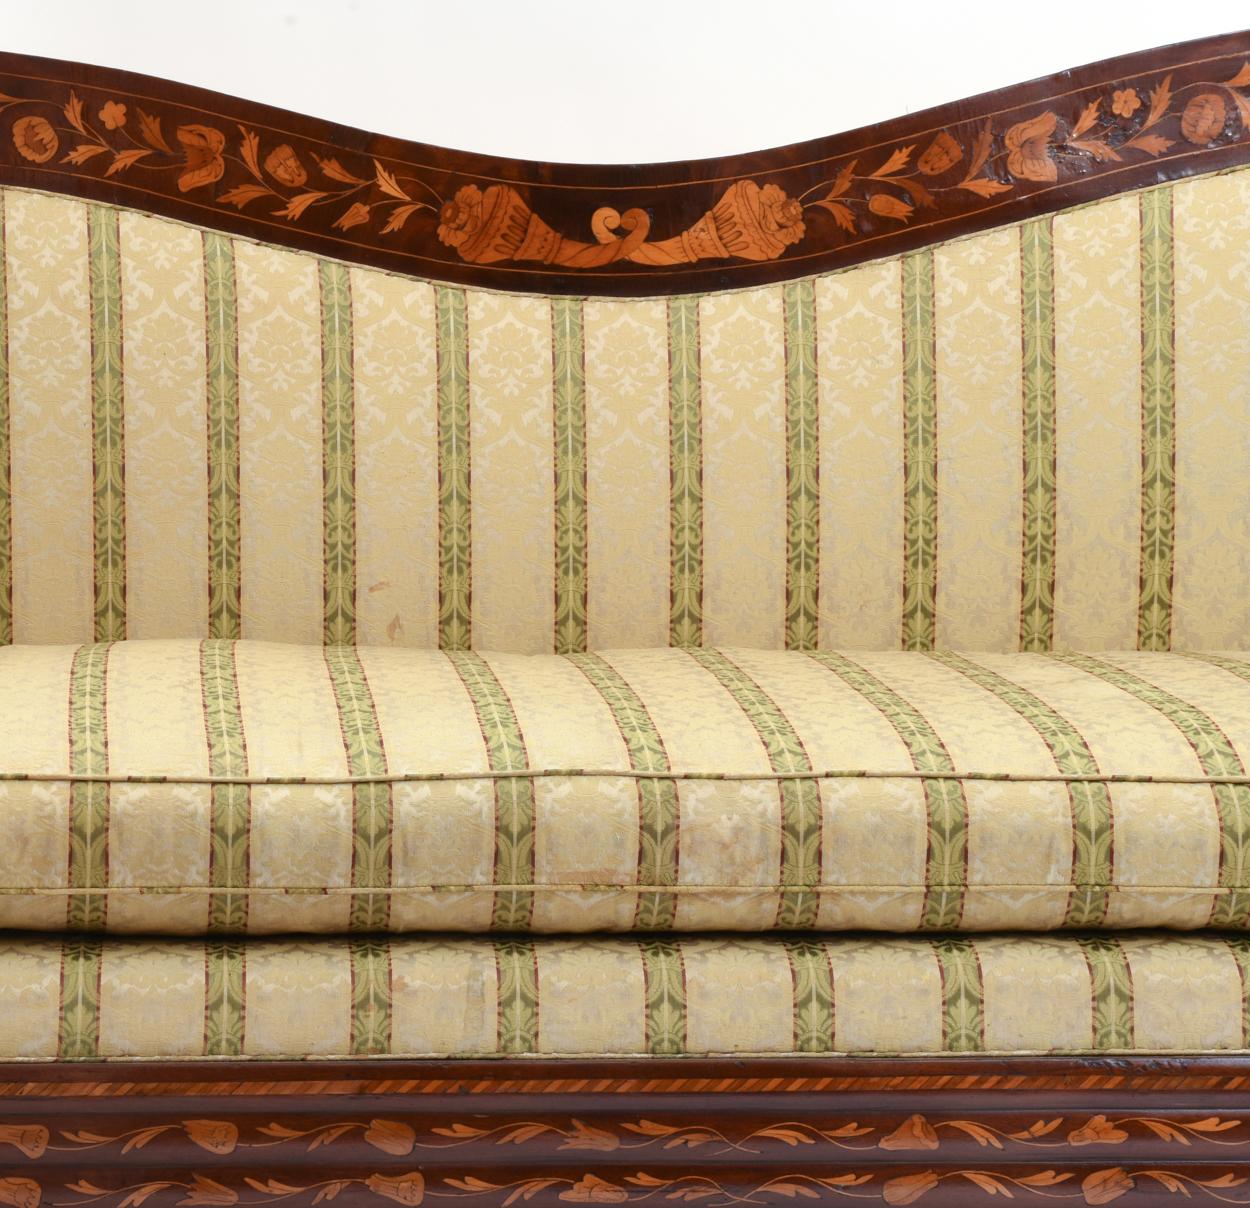 Early 19th century well proportioned marquetry wood inlaid sofa with scrolled back and rolled arms design details with short Grecian curved legs with claw and ball feet. The sofa is in excellent antique condition. Minor wear consistent with age /